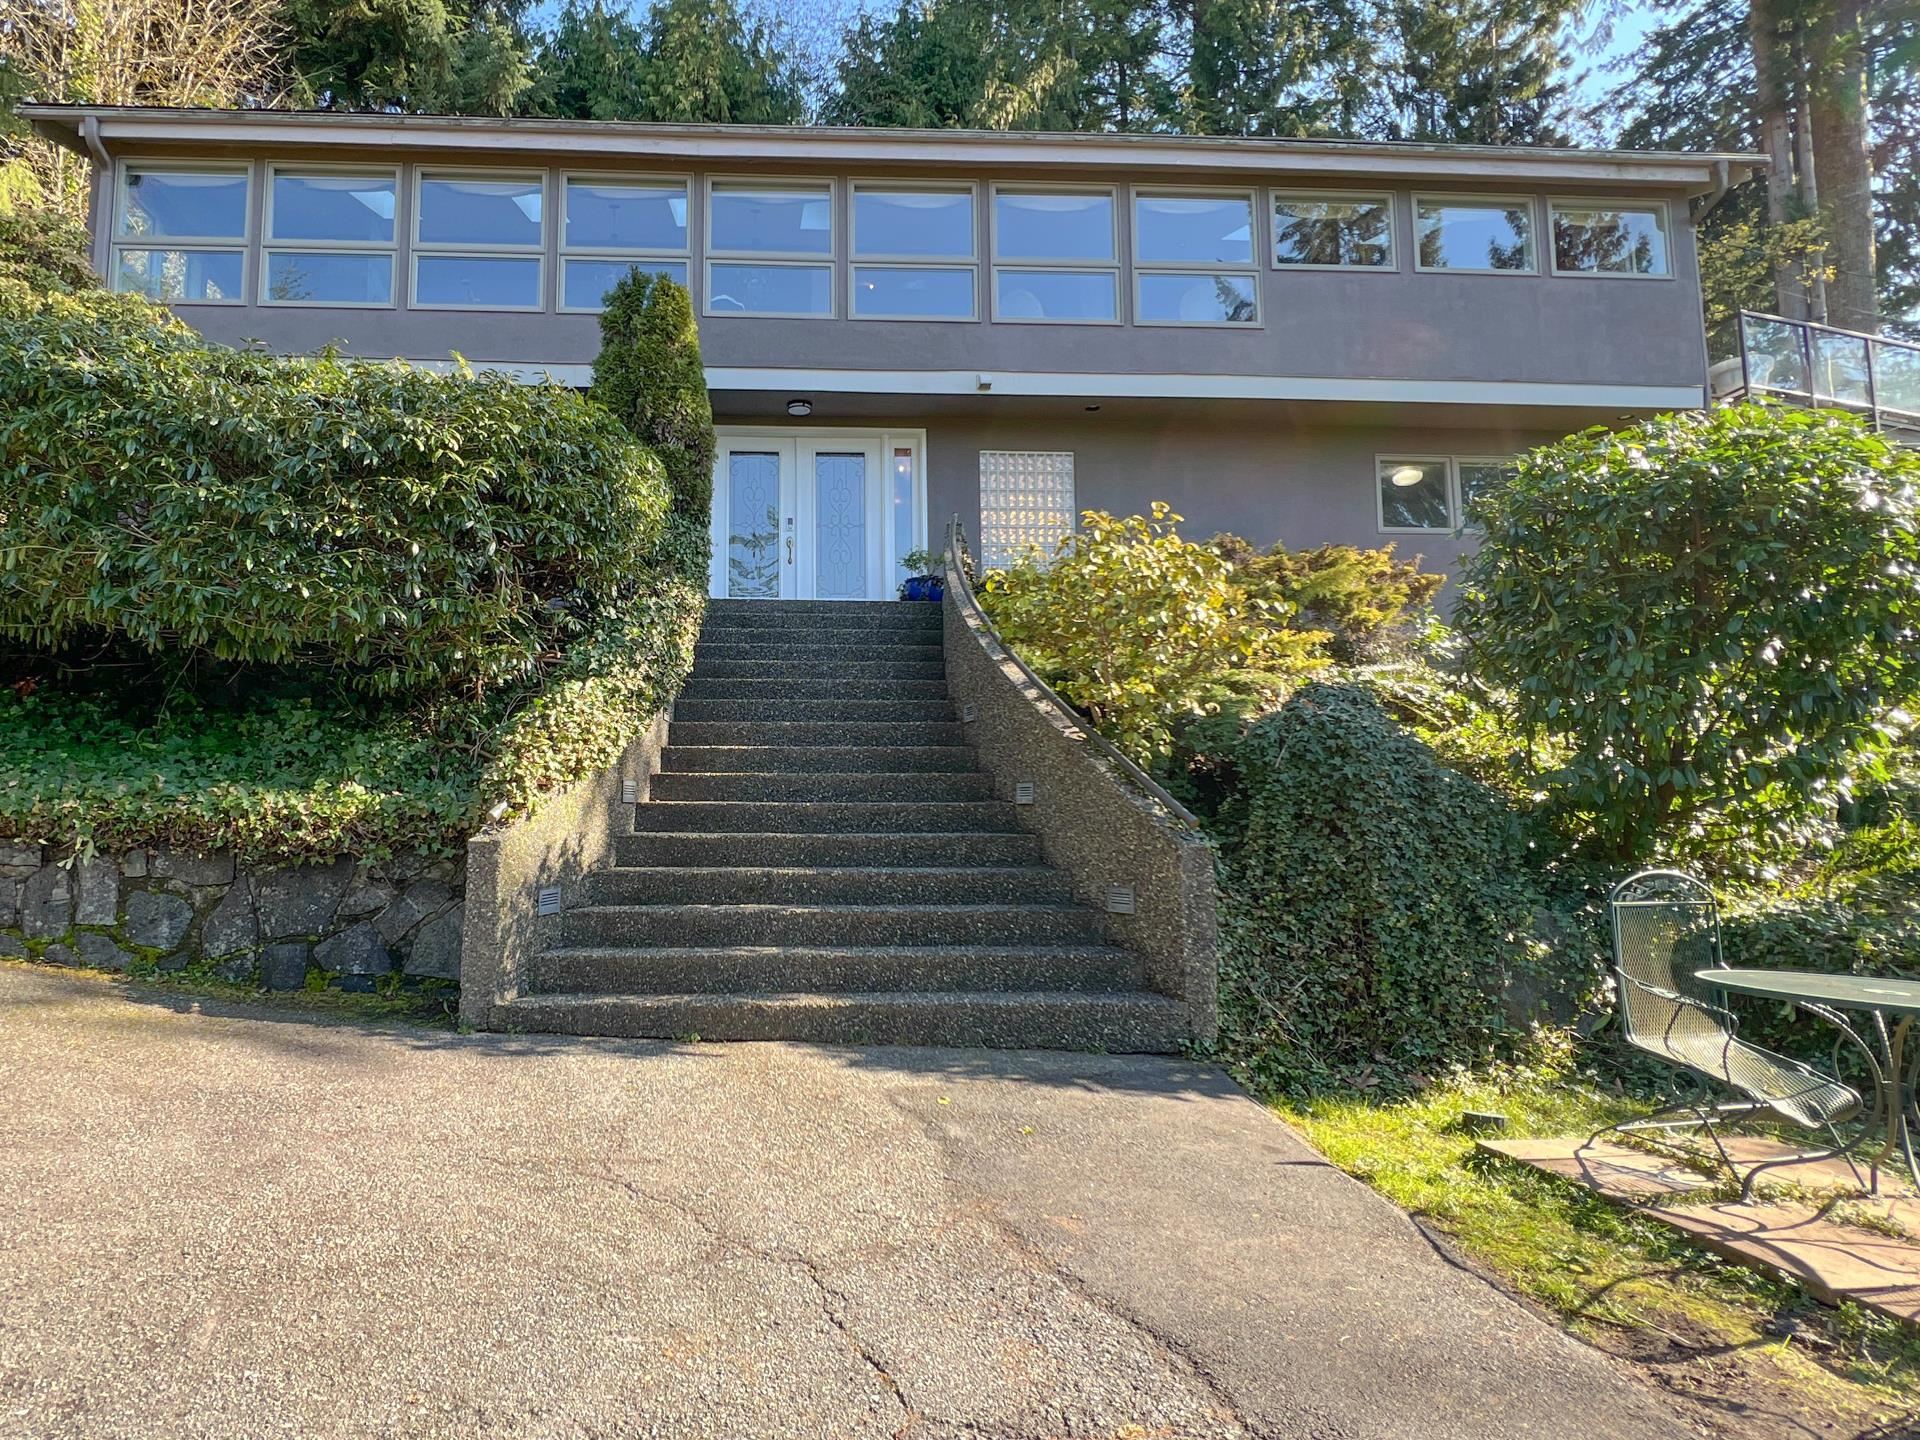 Listing image of 15 OCEANVIEW ROAD